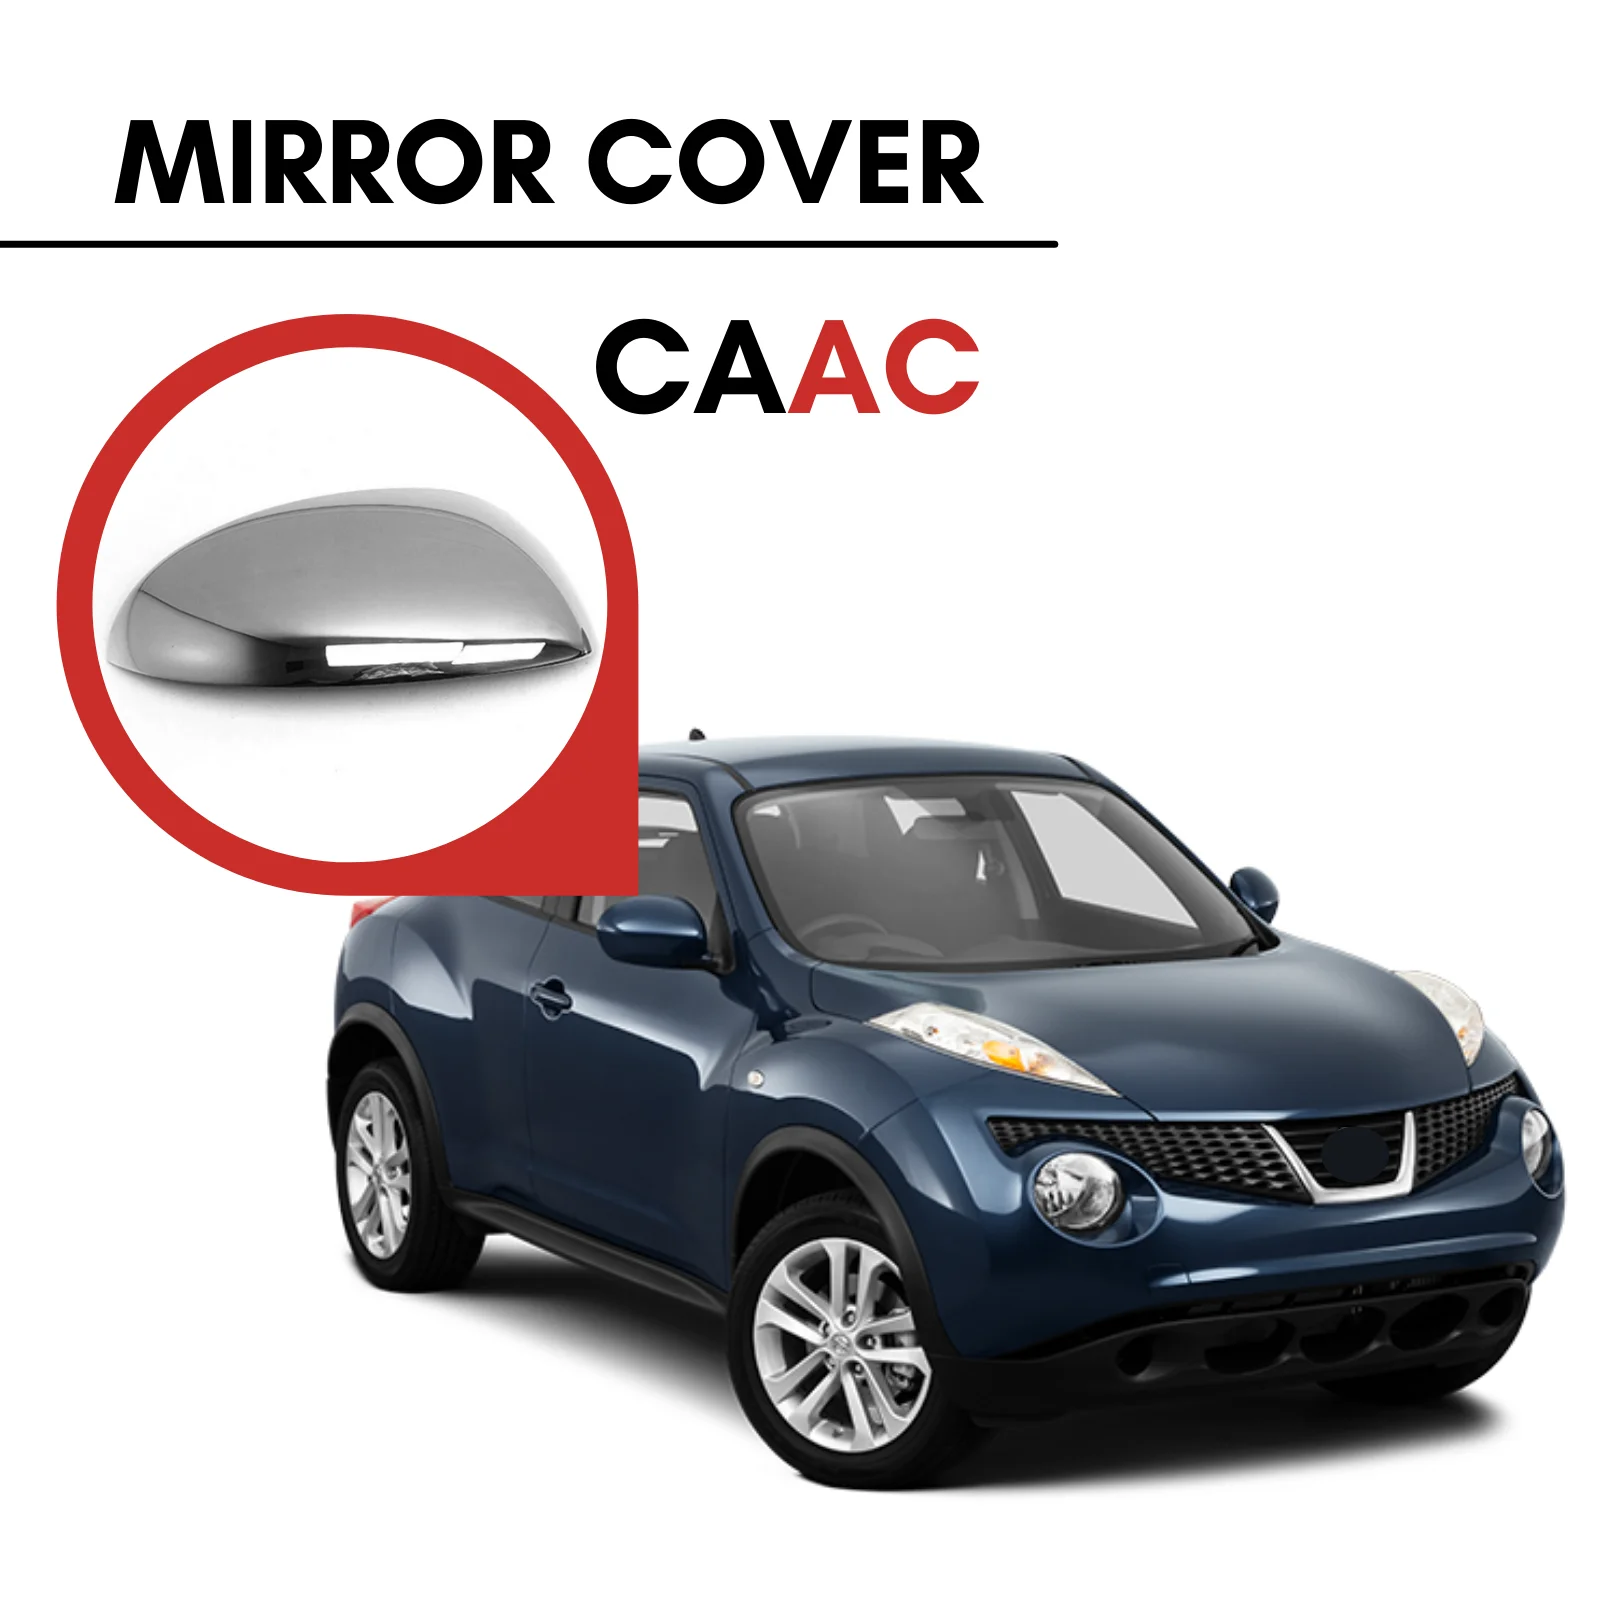 

FOR NISSAN JUKE 1 2010-2014 2 PCS CHROME SIDE MIRROR COVER STAINLESS STEEL SILVER COLOR MIRROR PLATED MOUNTING HARDWARE INCLUDED MODIFIED